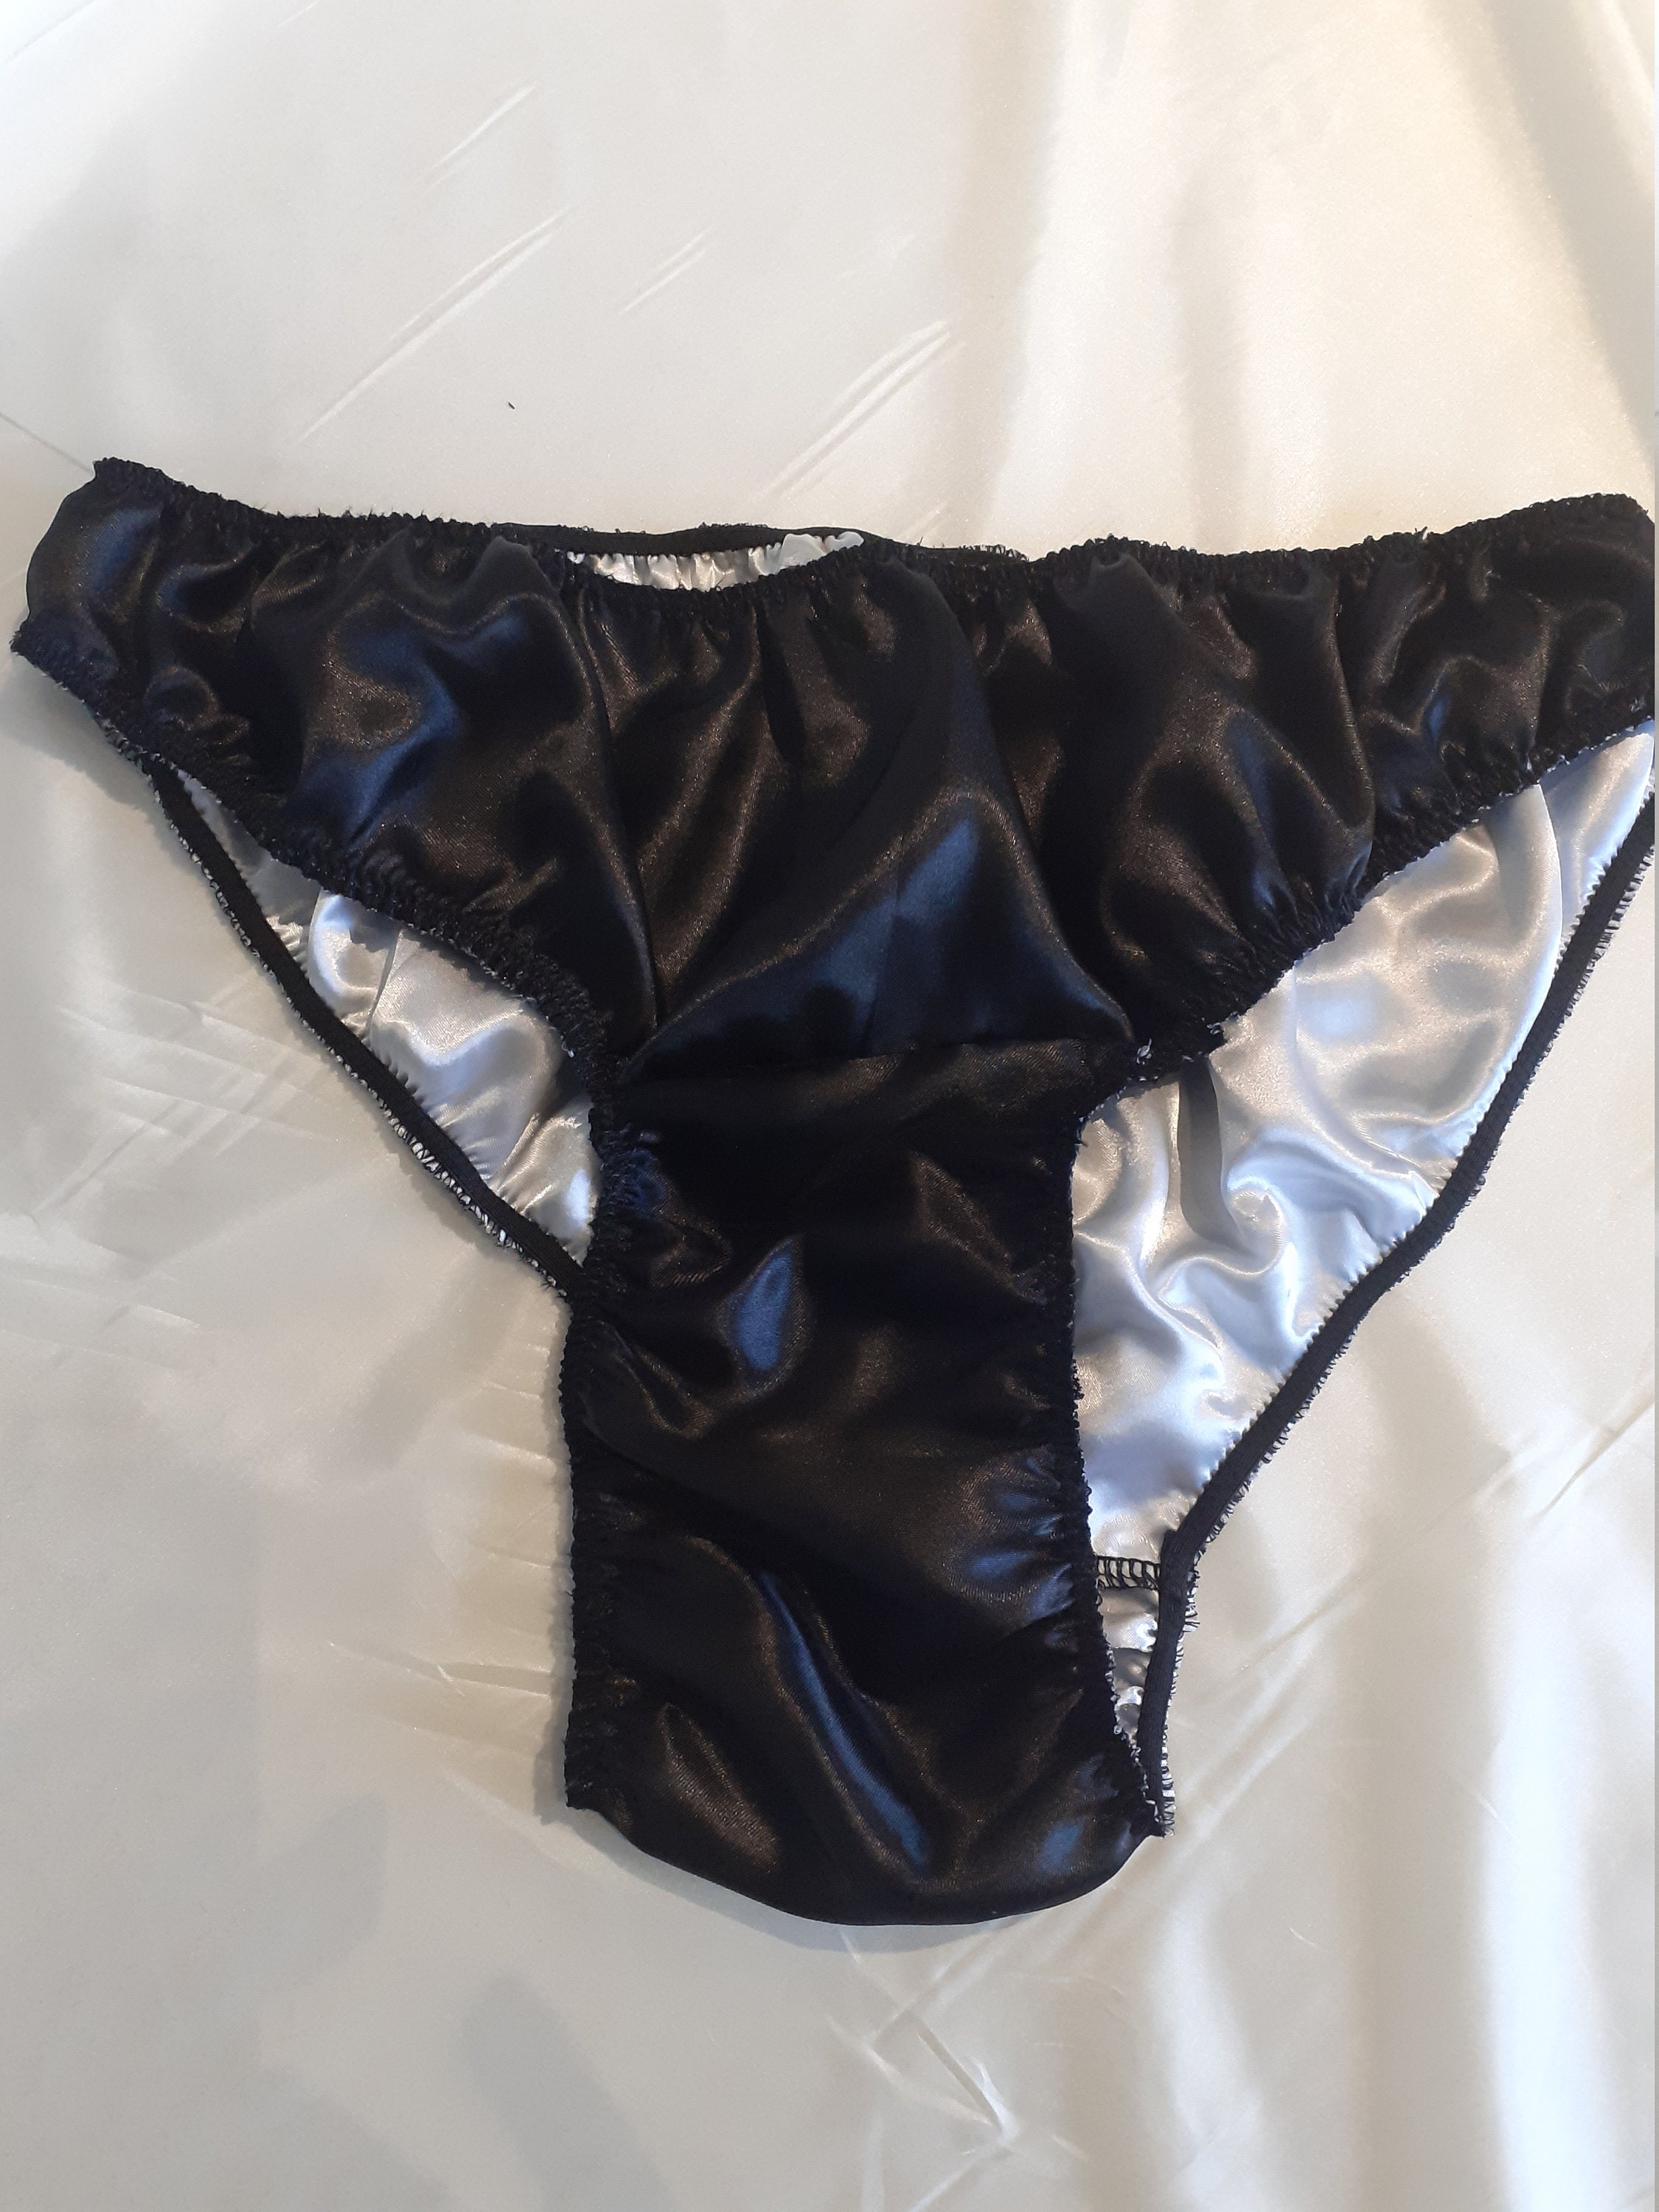 Knickers underwear Made for Men Lingerie Bikini,DOUBLE Lined Satin Shiny,Panties 8-28 Ladies CD/TV,Adult